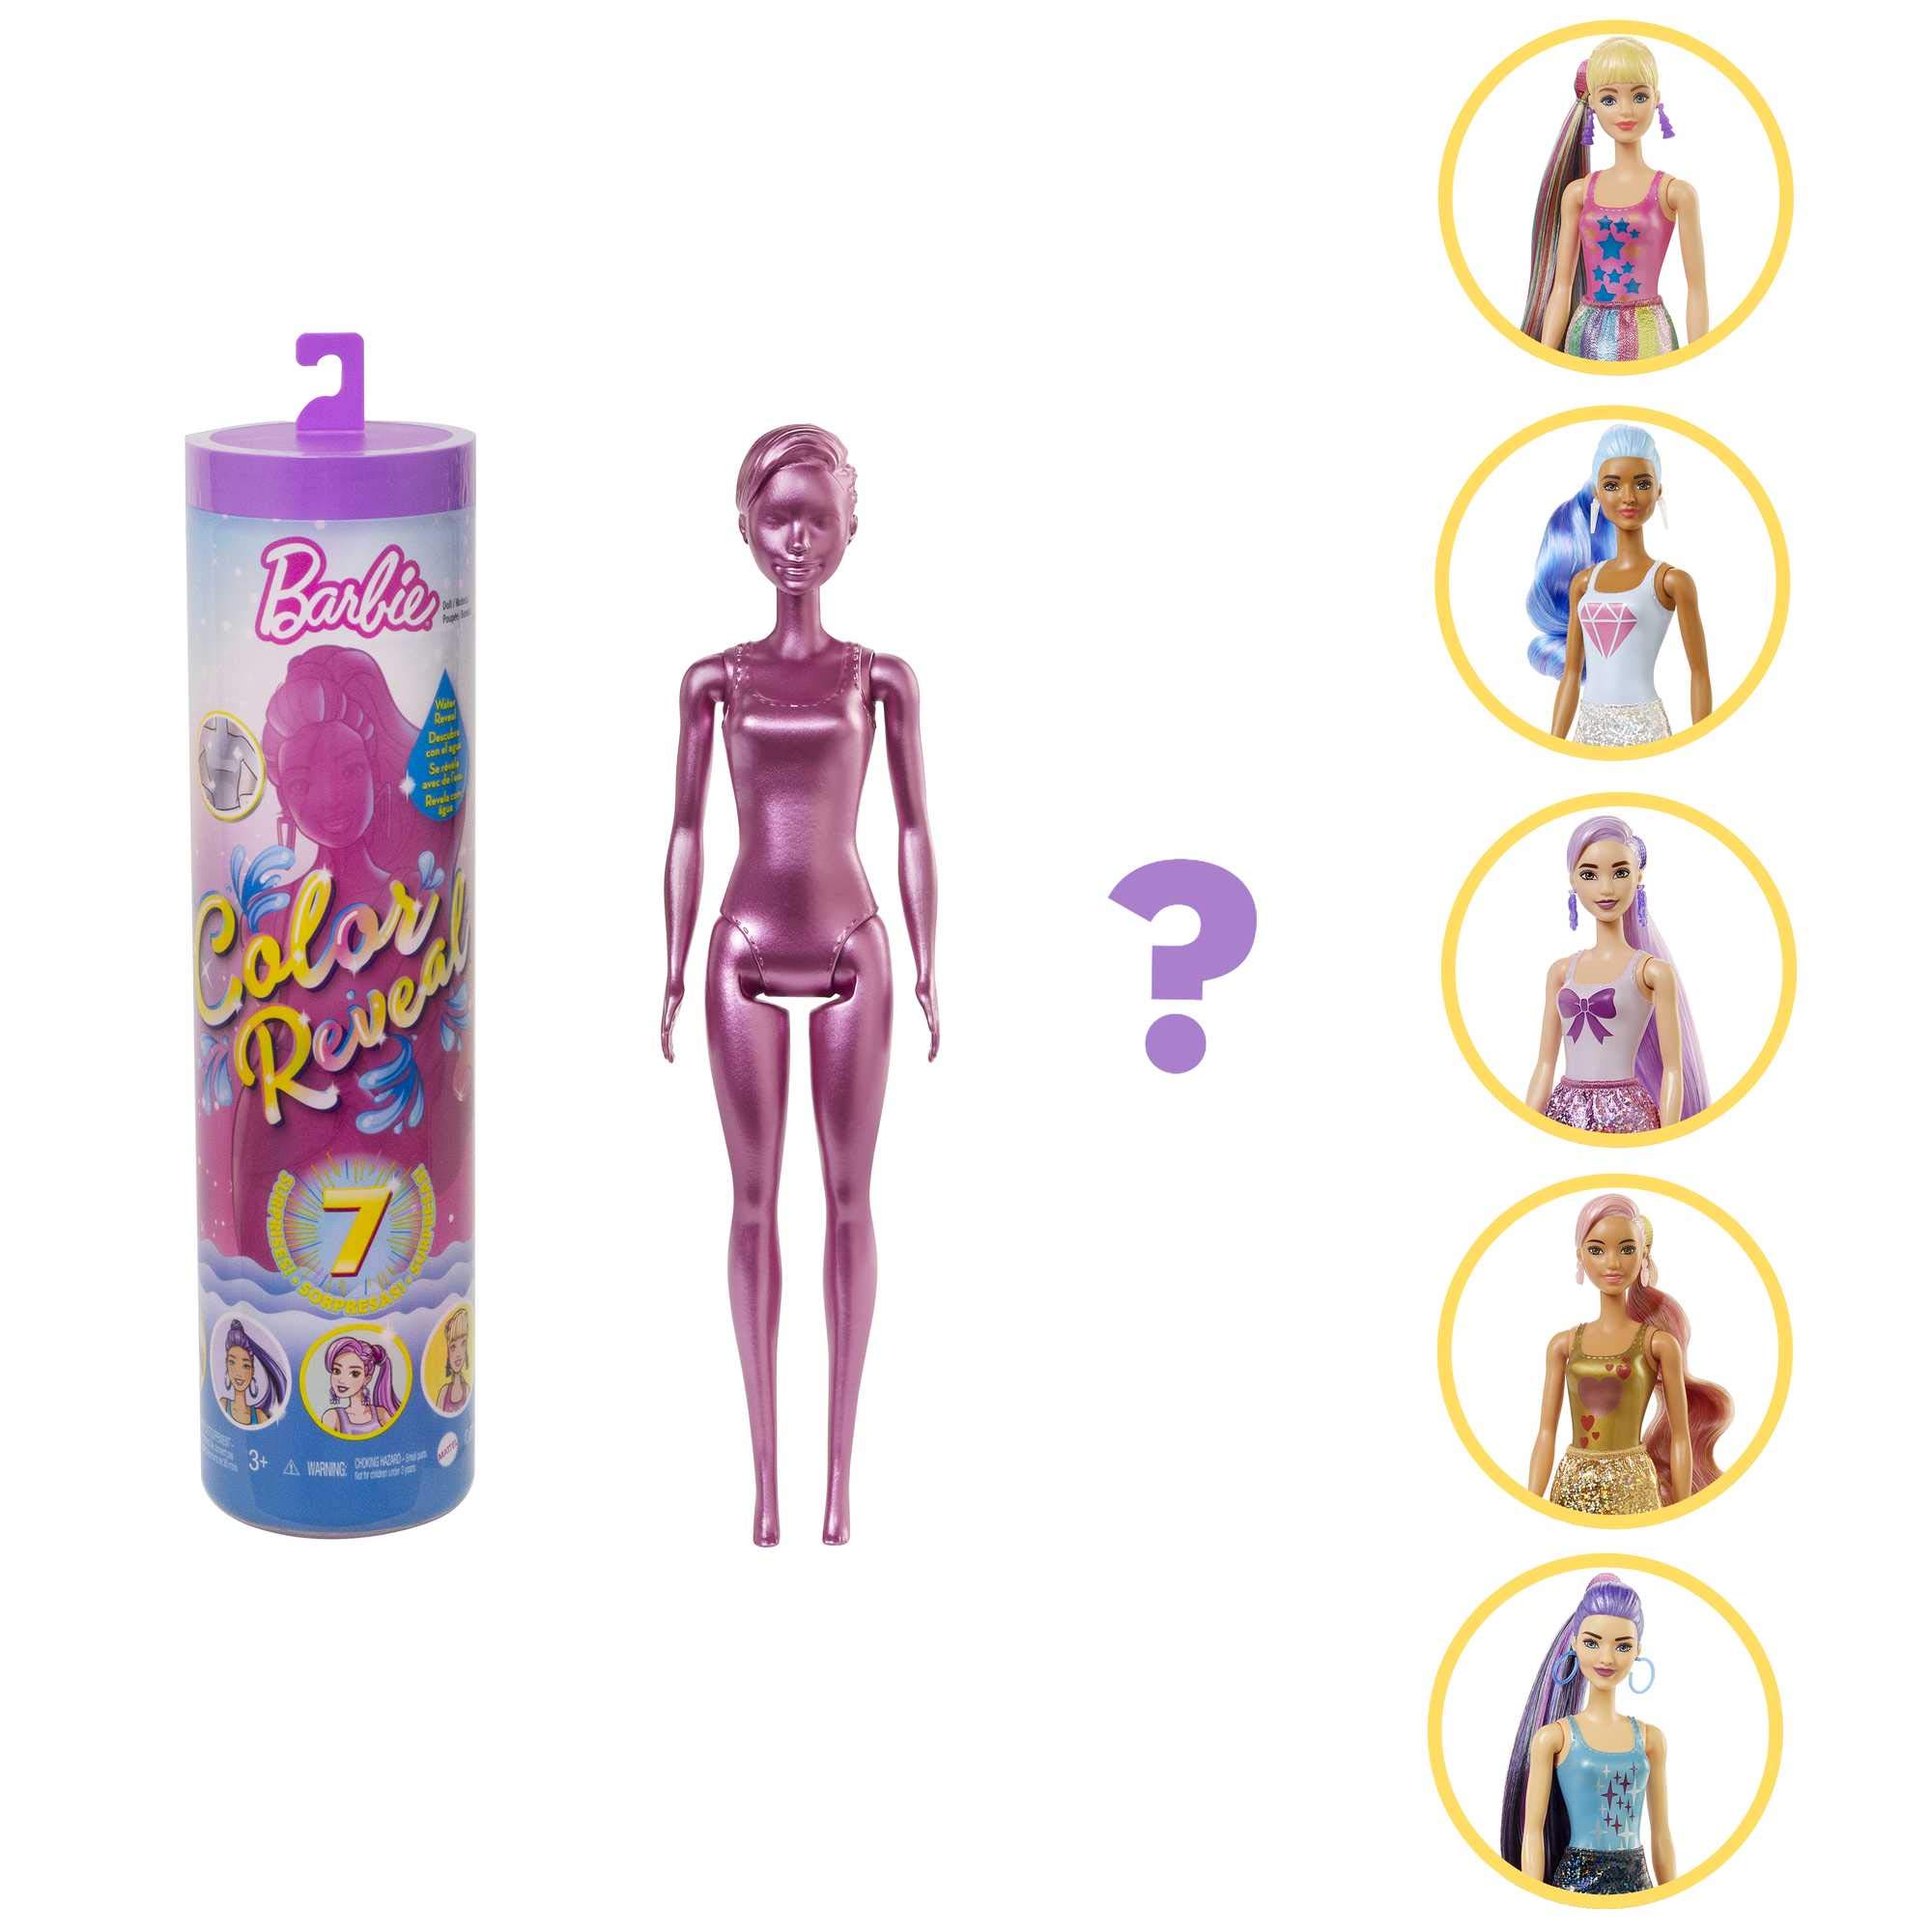 Barbie Color Reveal Doll & Accessories, Shimmer Series, 7 Surprises, 1 Barbie Doll (Styles May Vary)